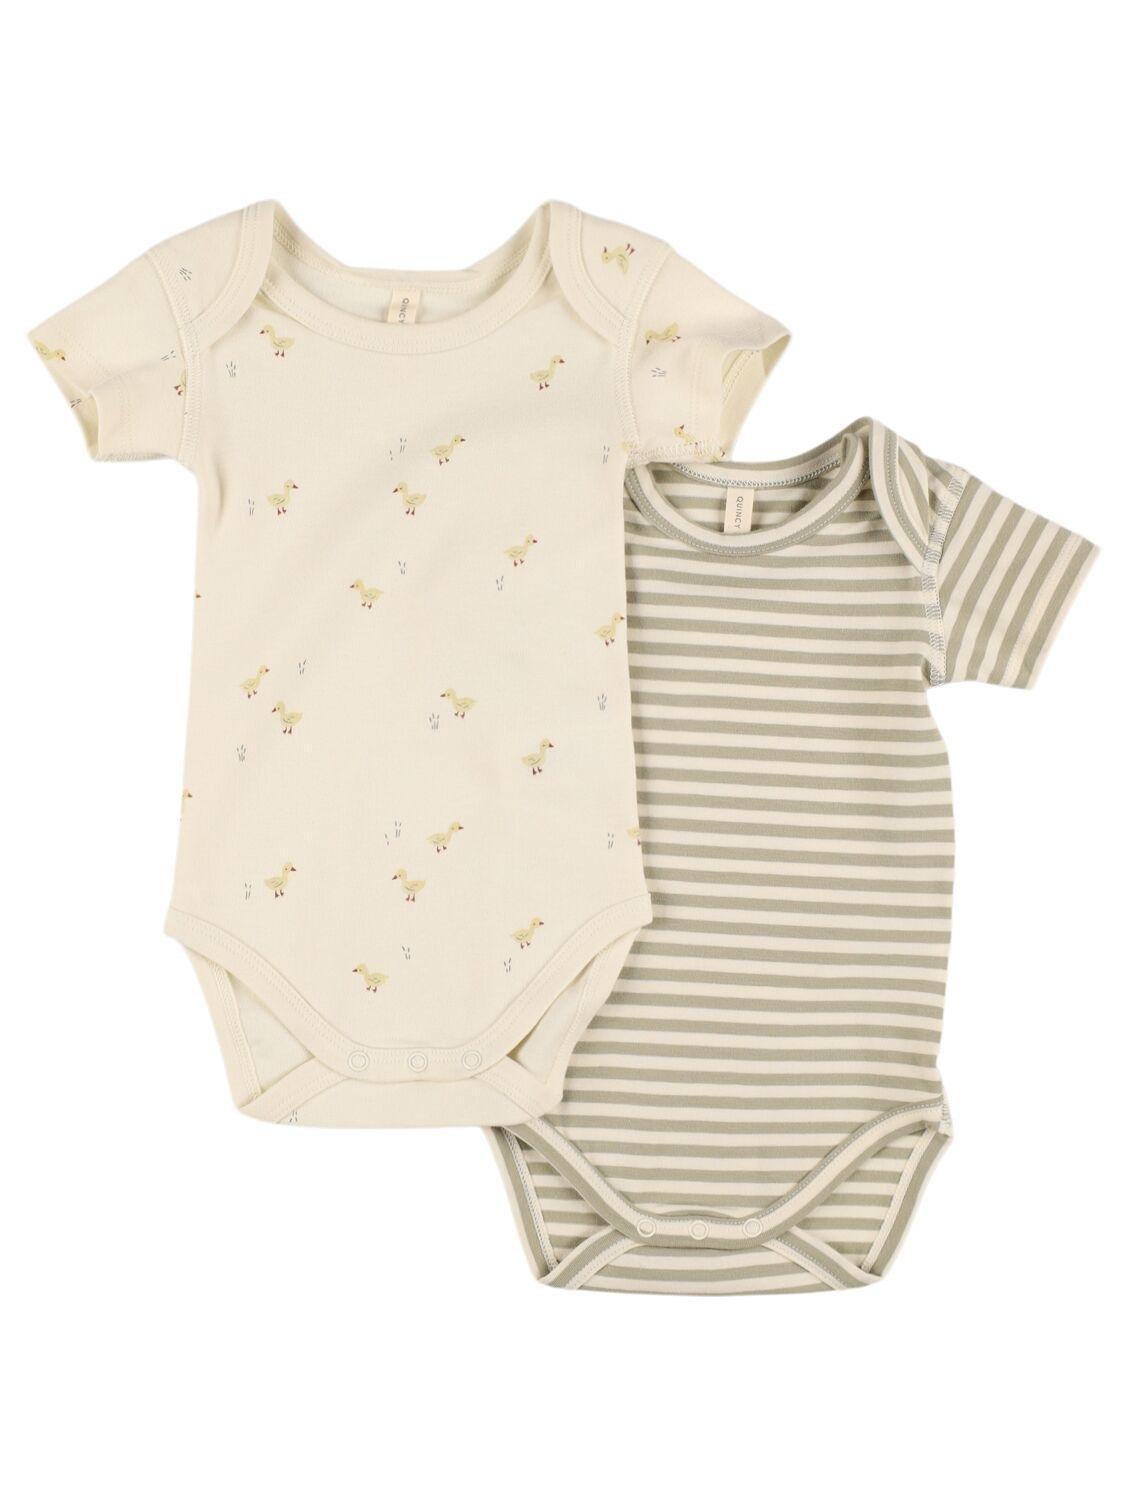 Set Of 2 Organic Cotton Bodysuits by QUINCY MAE